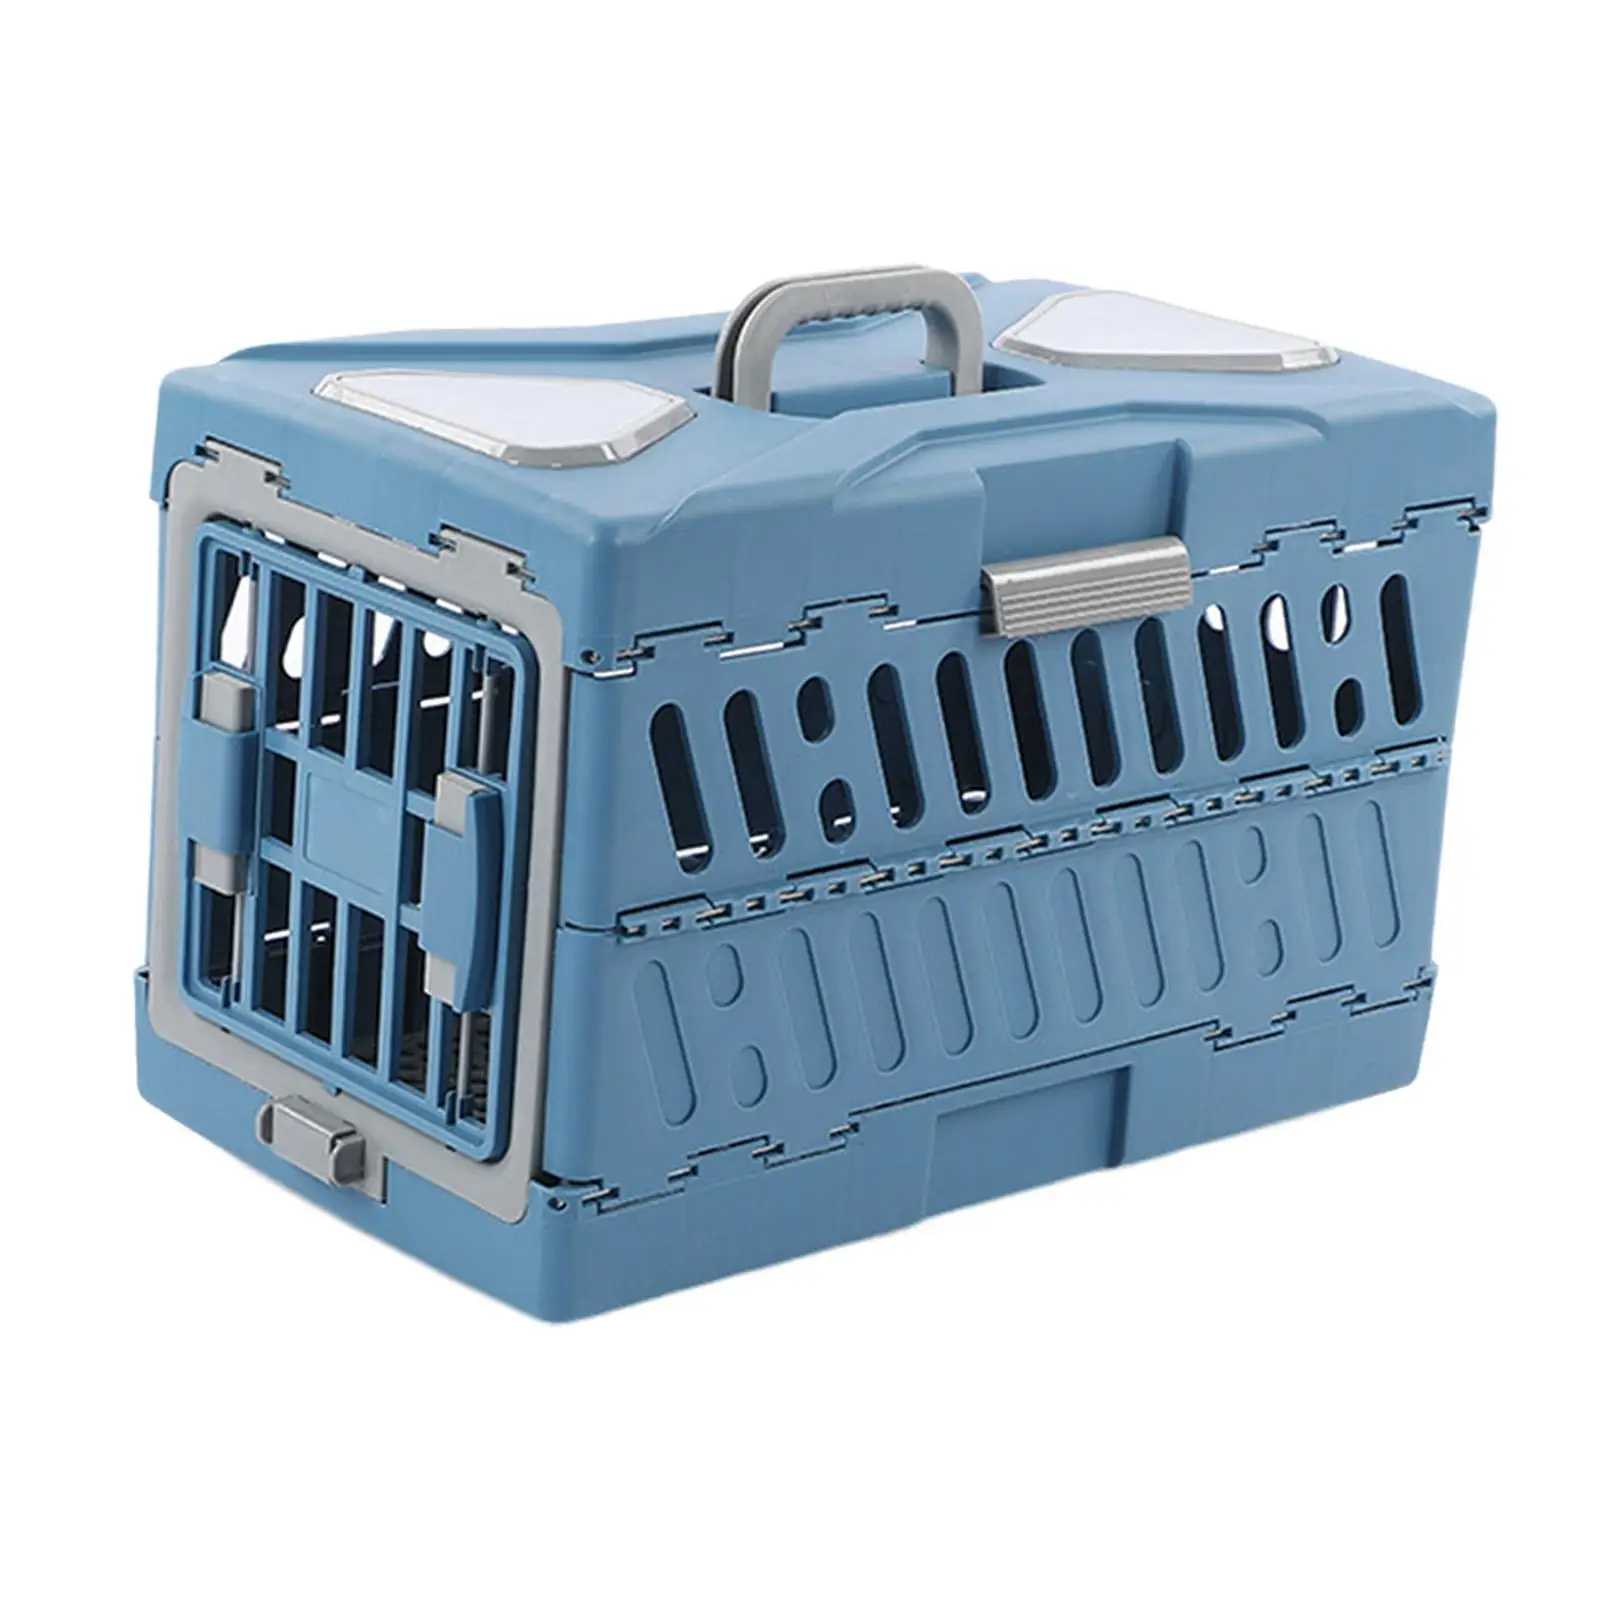 Collapsible Puppy Crate Folding Portable Dog Kennel for Puppy Small Dogs Cat